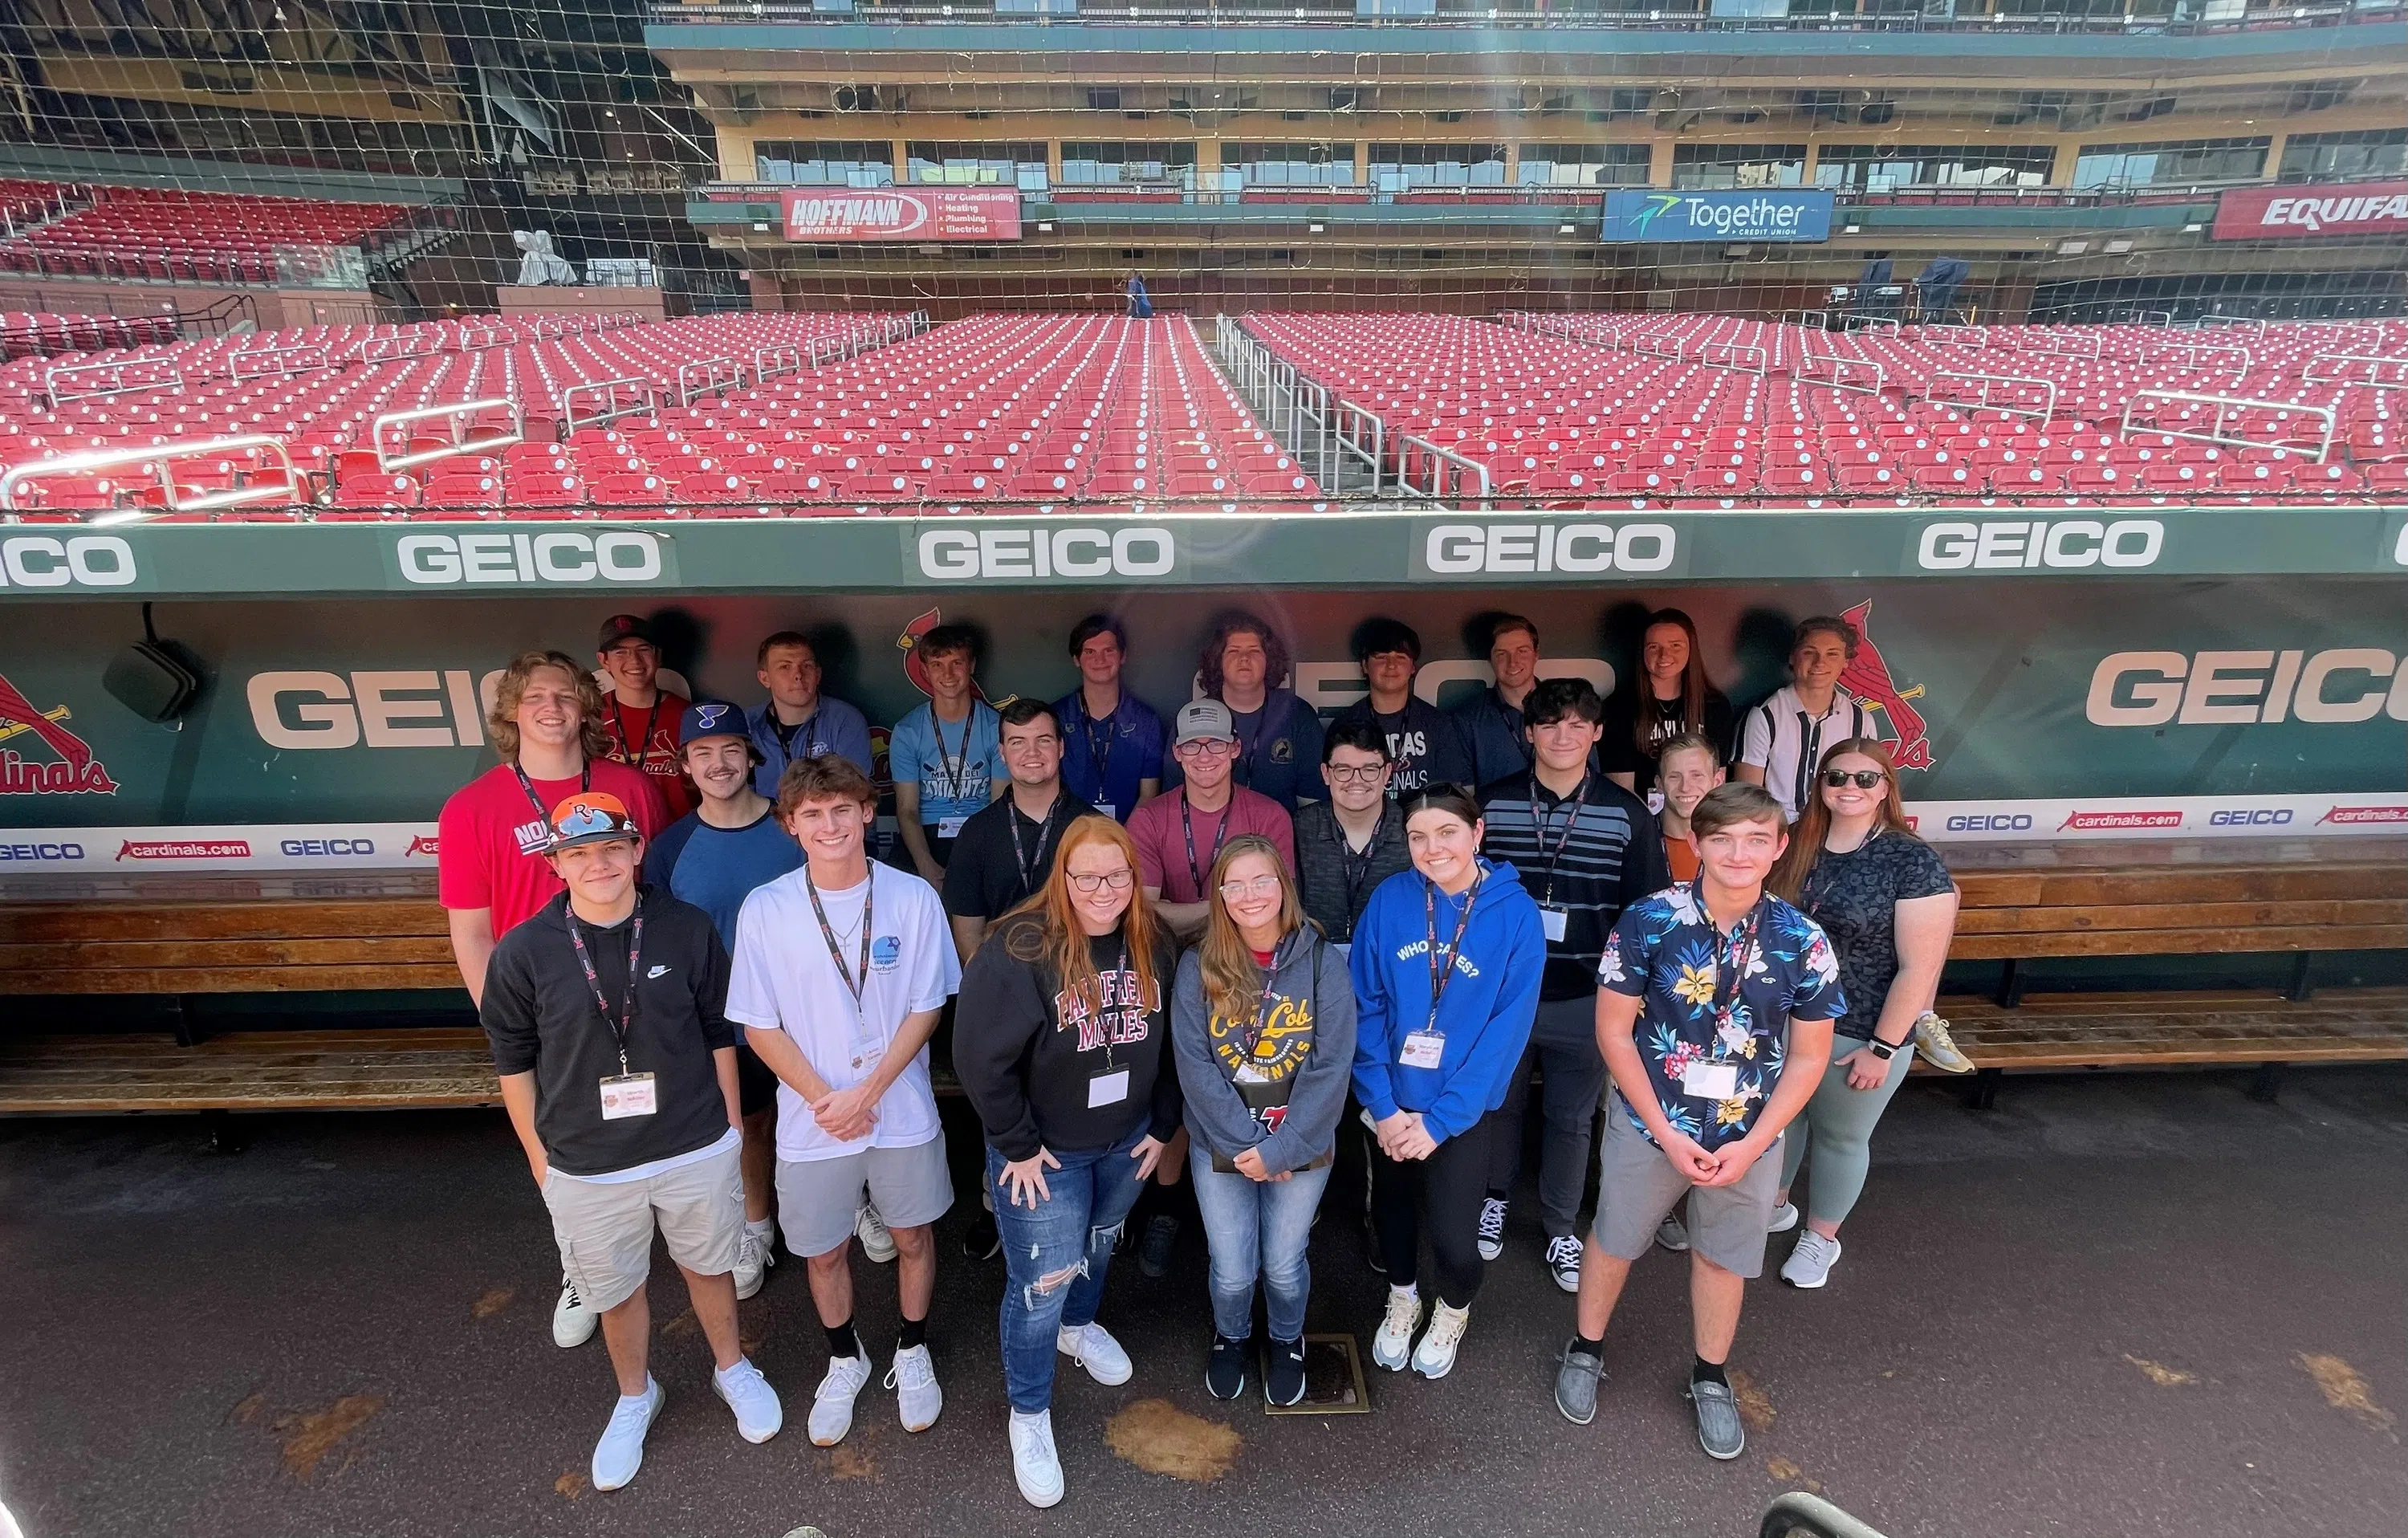 Prospective Maryville Students Tour the Dugout at Busch Stadium